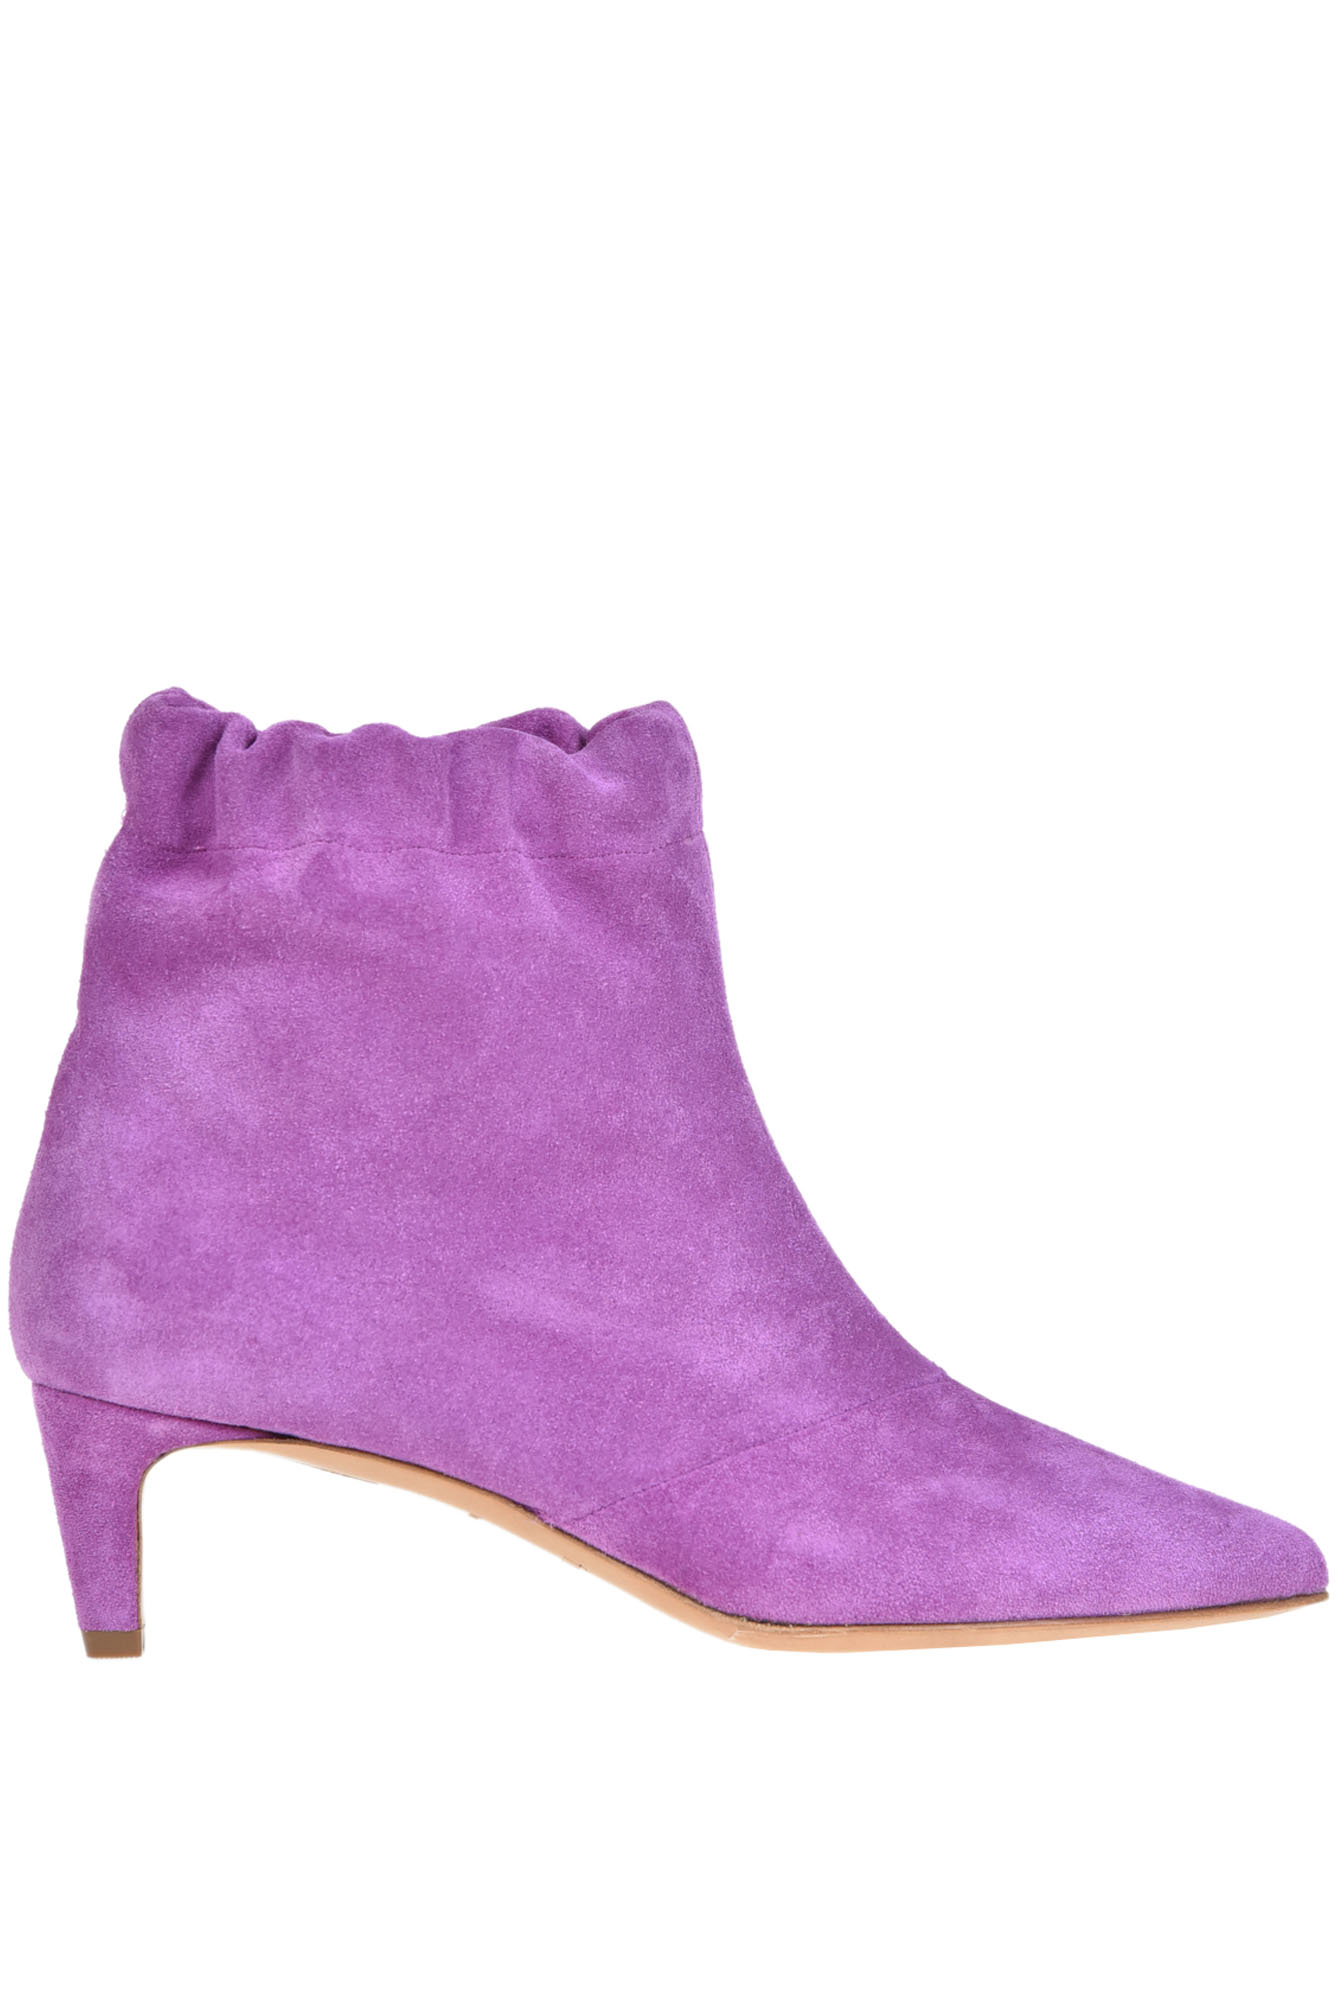 Forte Forte Suede Ankle Boots In Fuxia